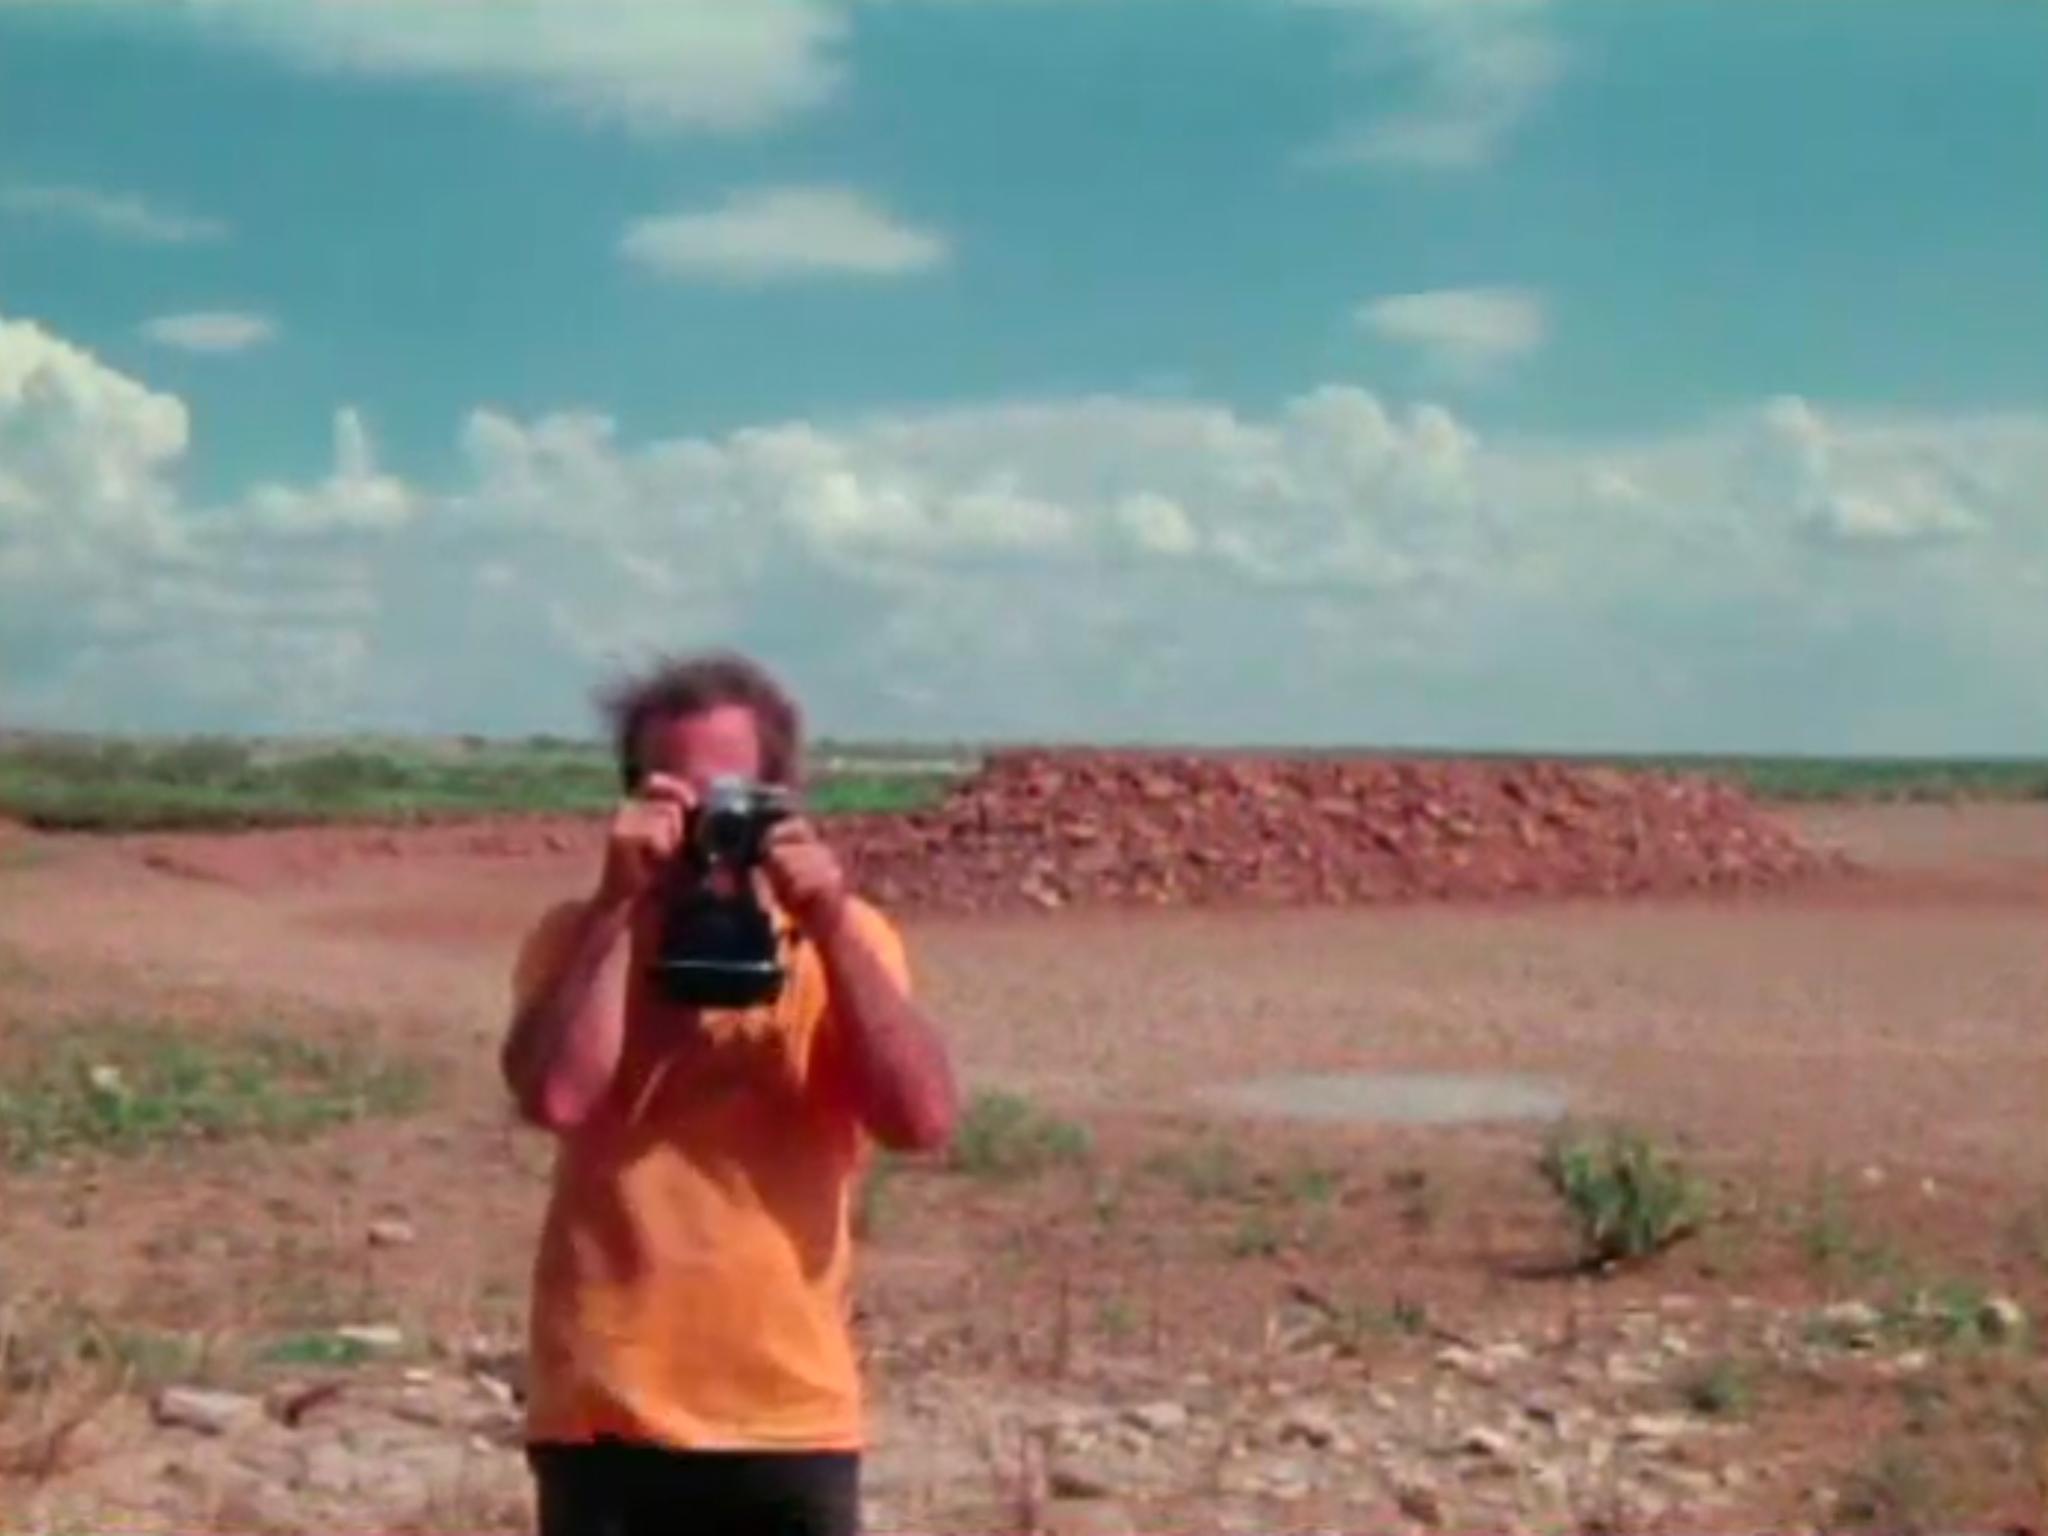 A young man taking a picture toward the camera with a dry lakebed in the background.